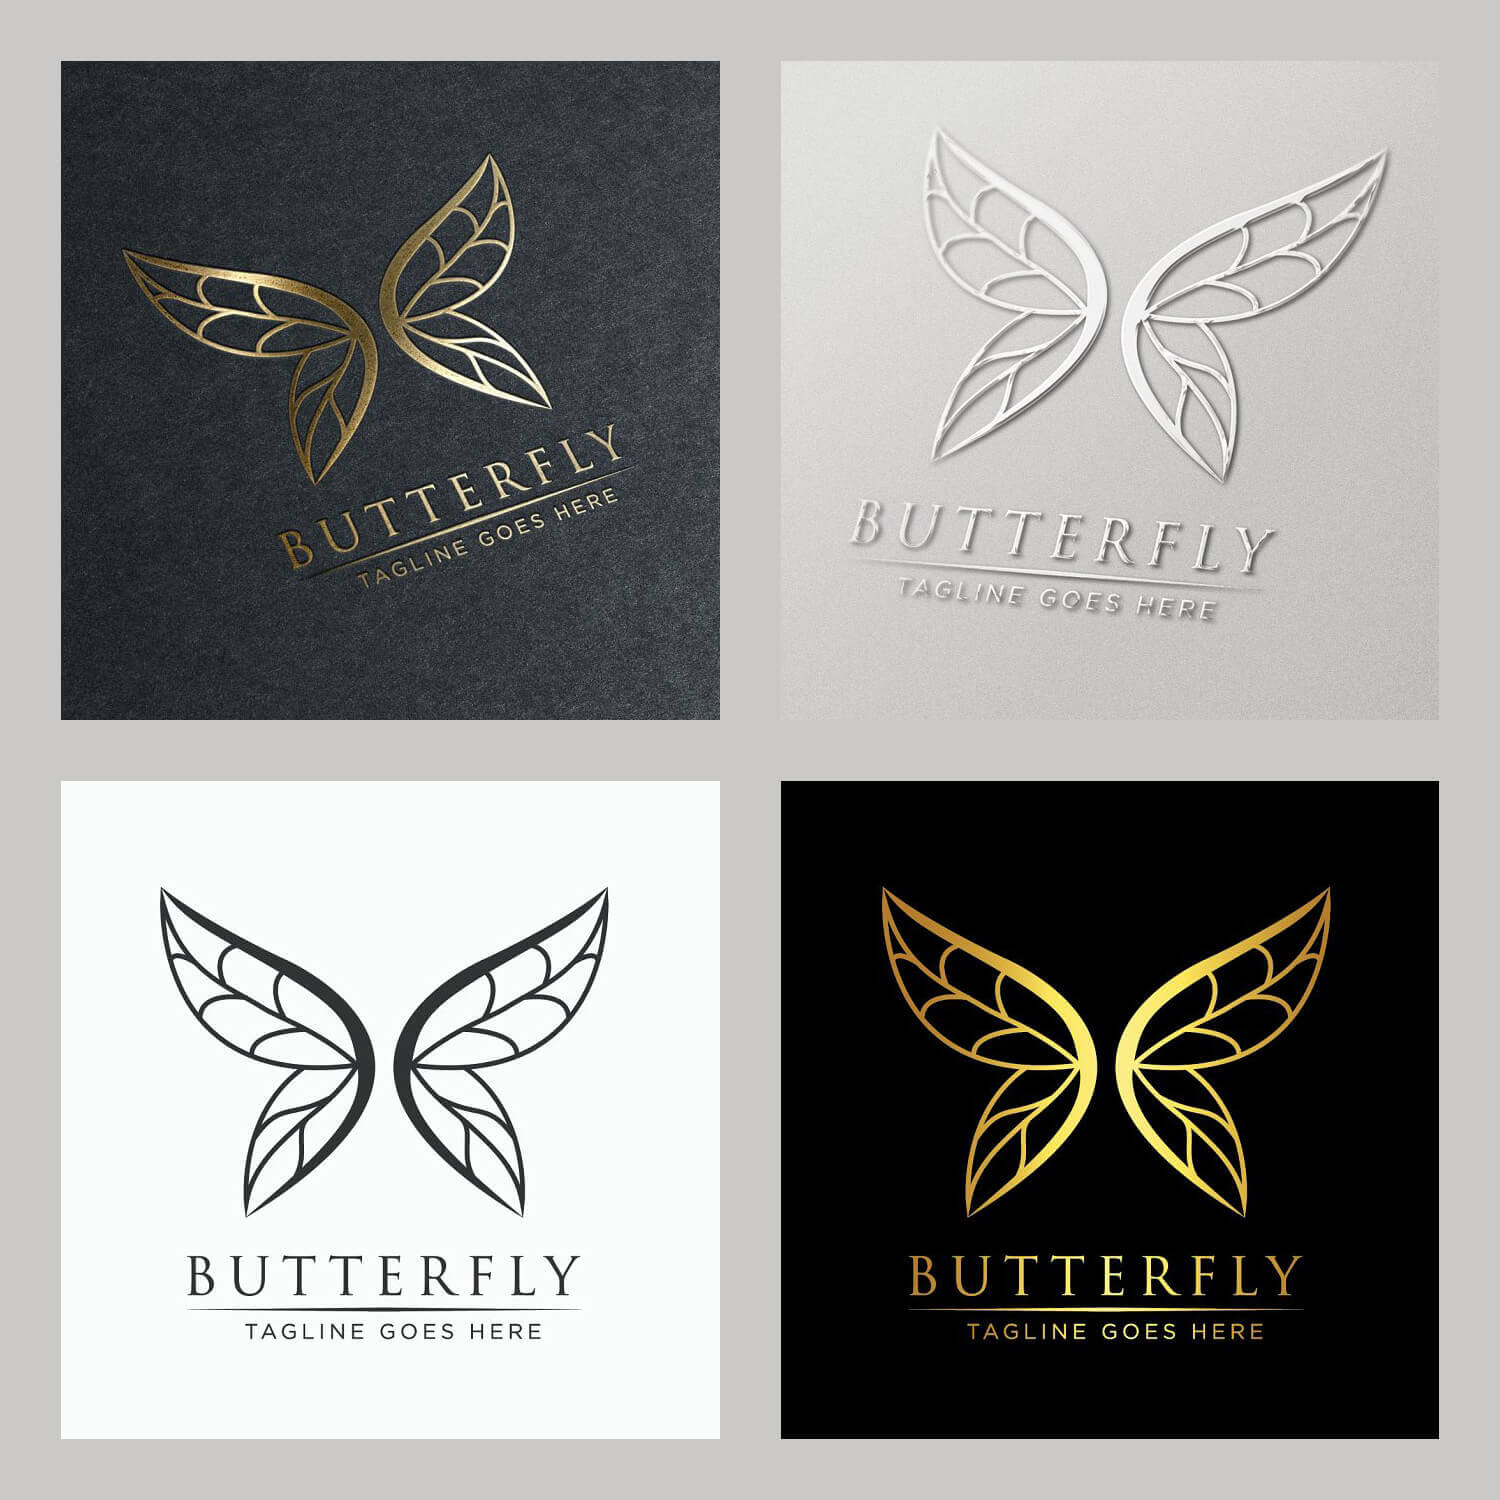 Golden butterfly logos on black and gray backgrounds and white and gray butterflies on light backgrounds.